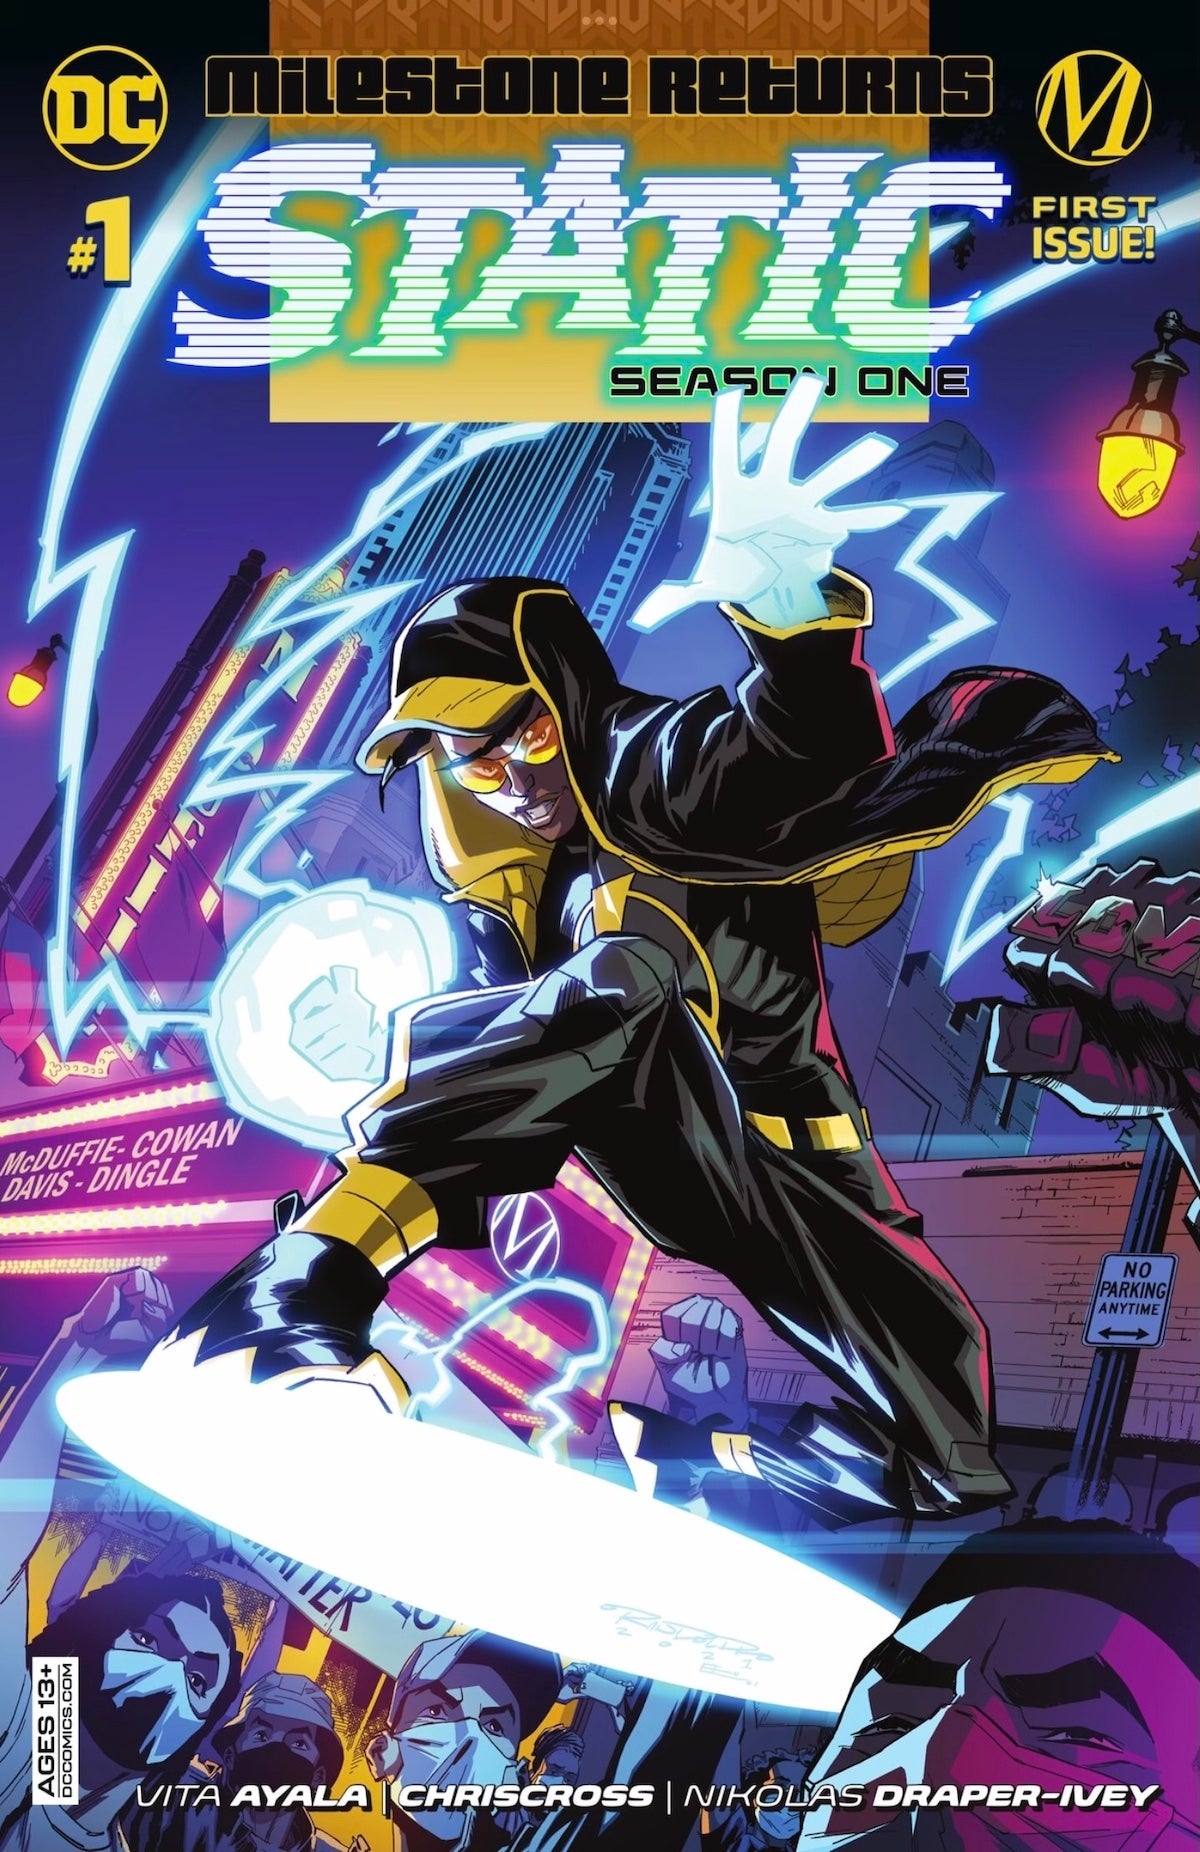 Cover of Static Season 1, showing Static and his lightning powers